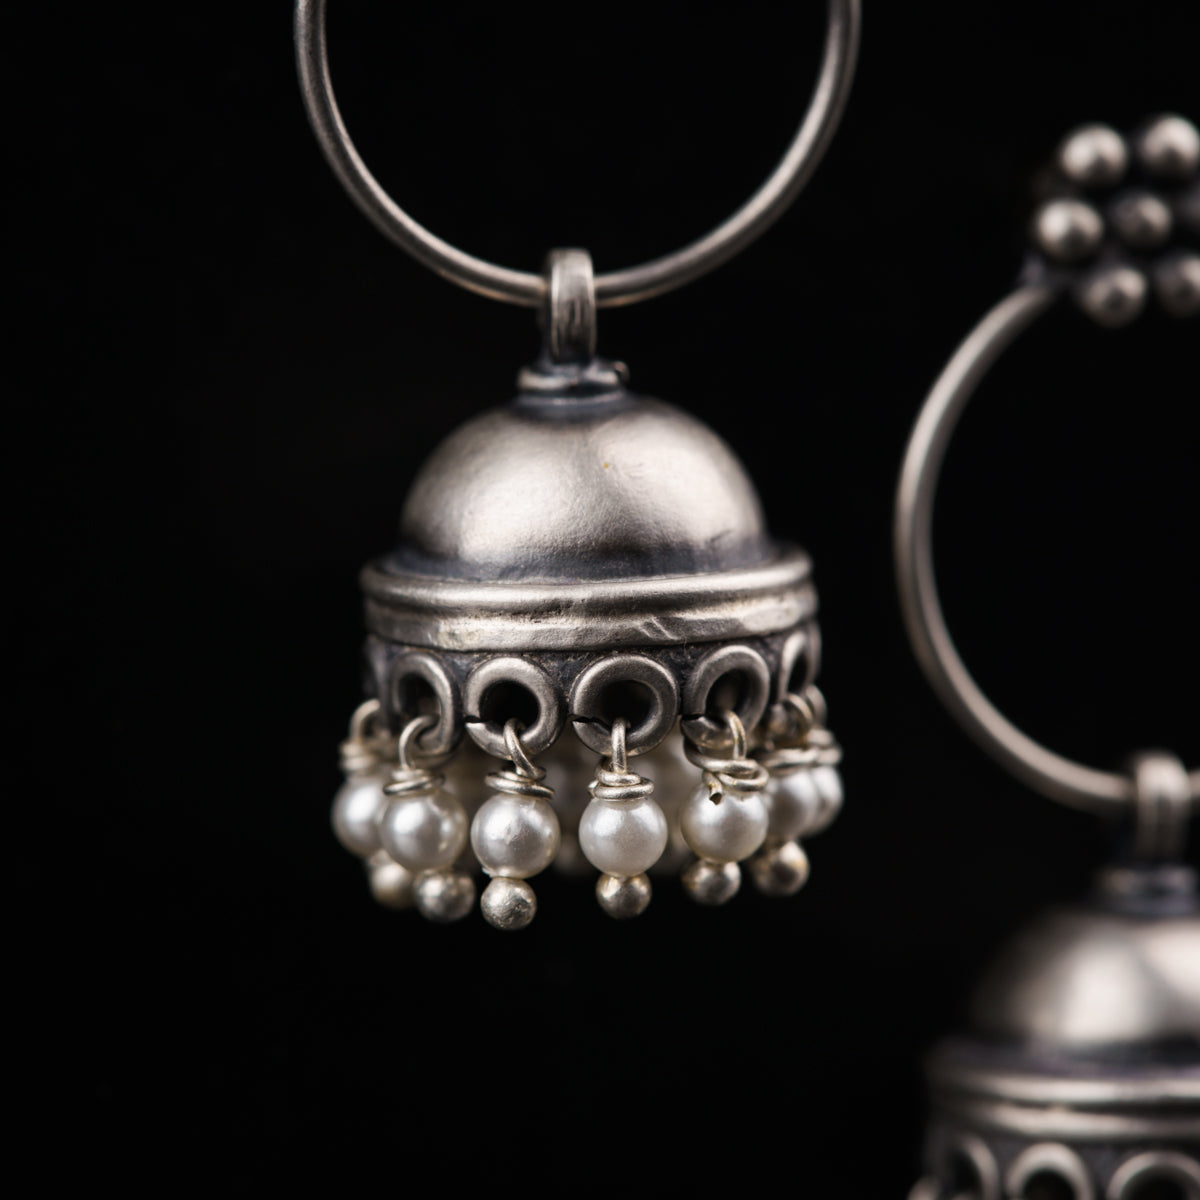 a metal bell with pearls hanging from it